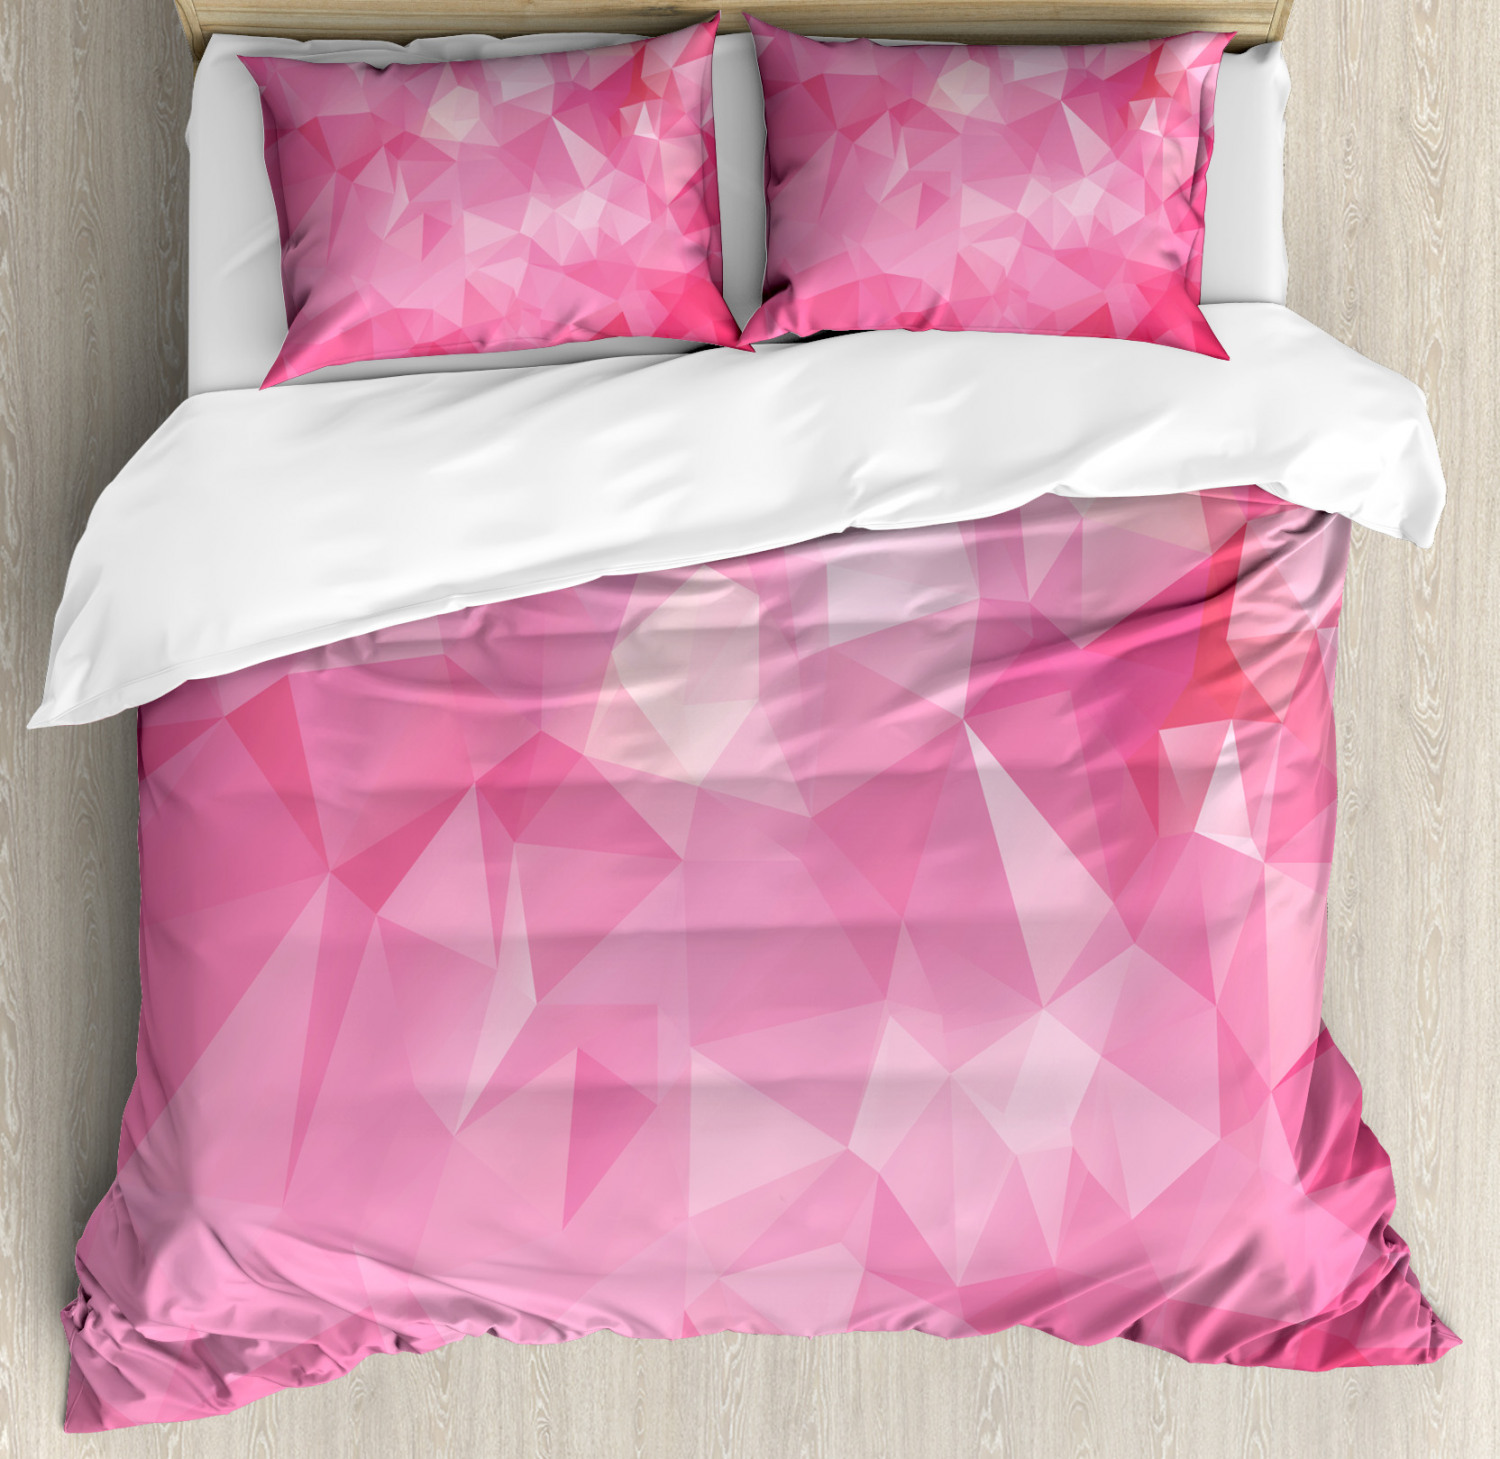 Pale Pink Duvet Cover Set With Pillow Shams Mosaic Fractal Style